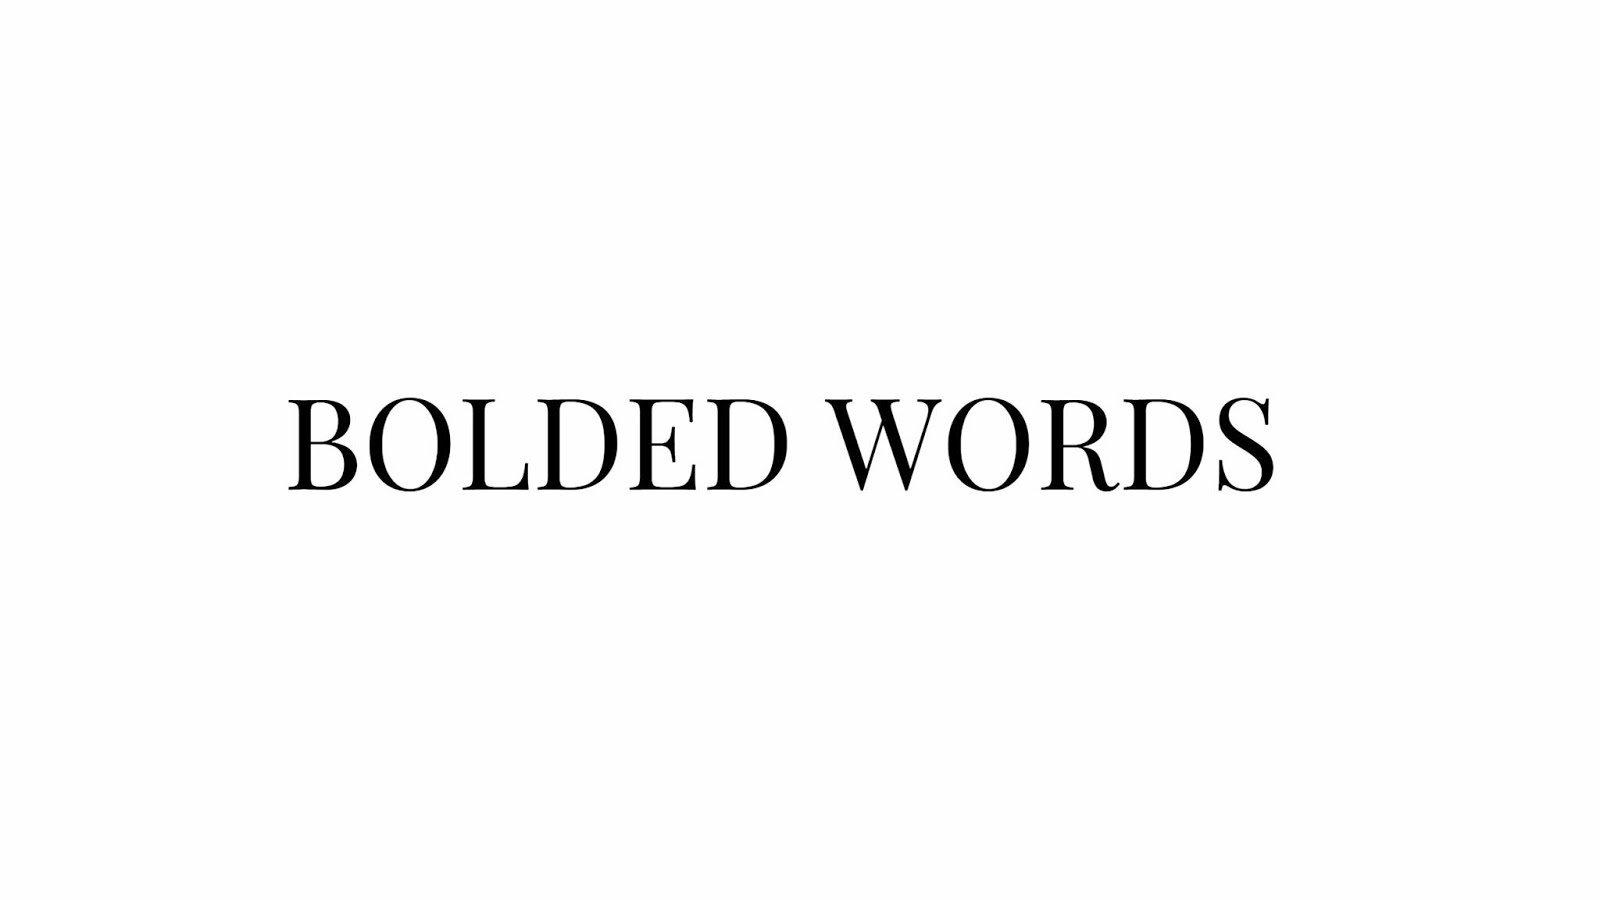 BOLDED WORDS